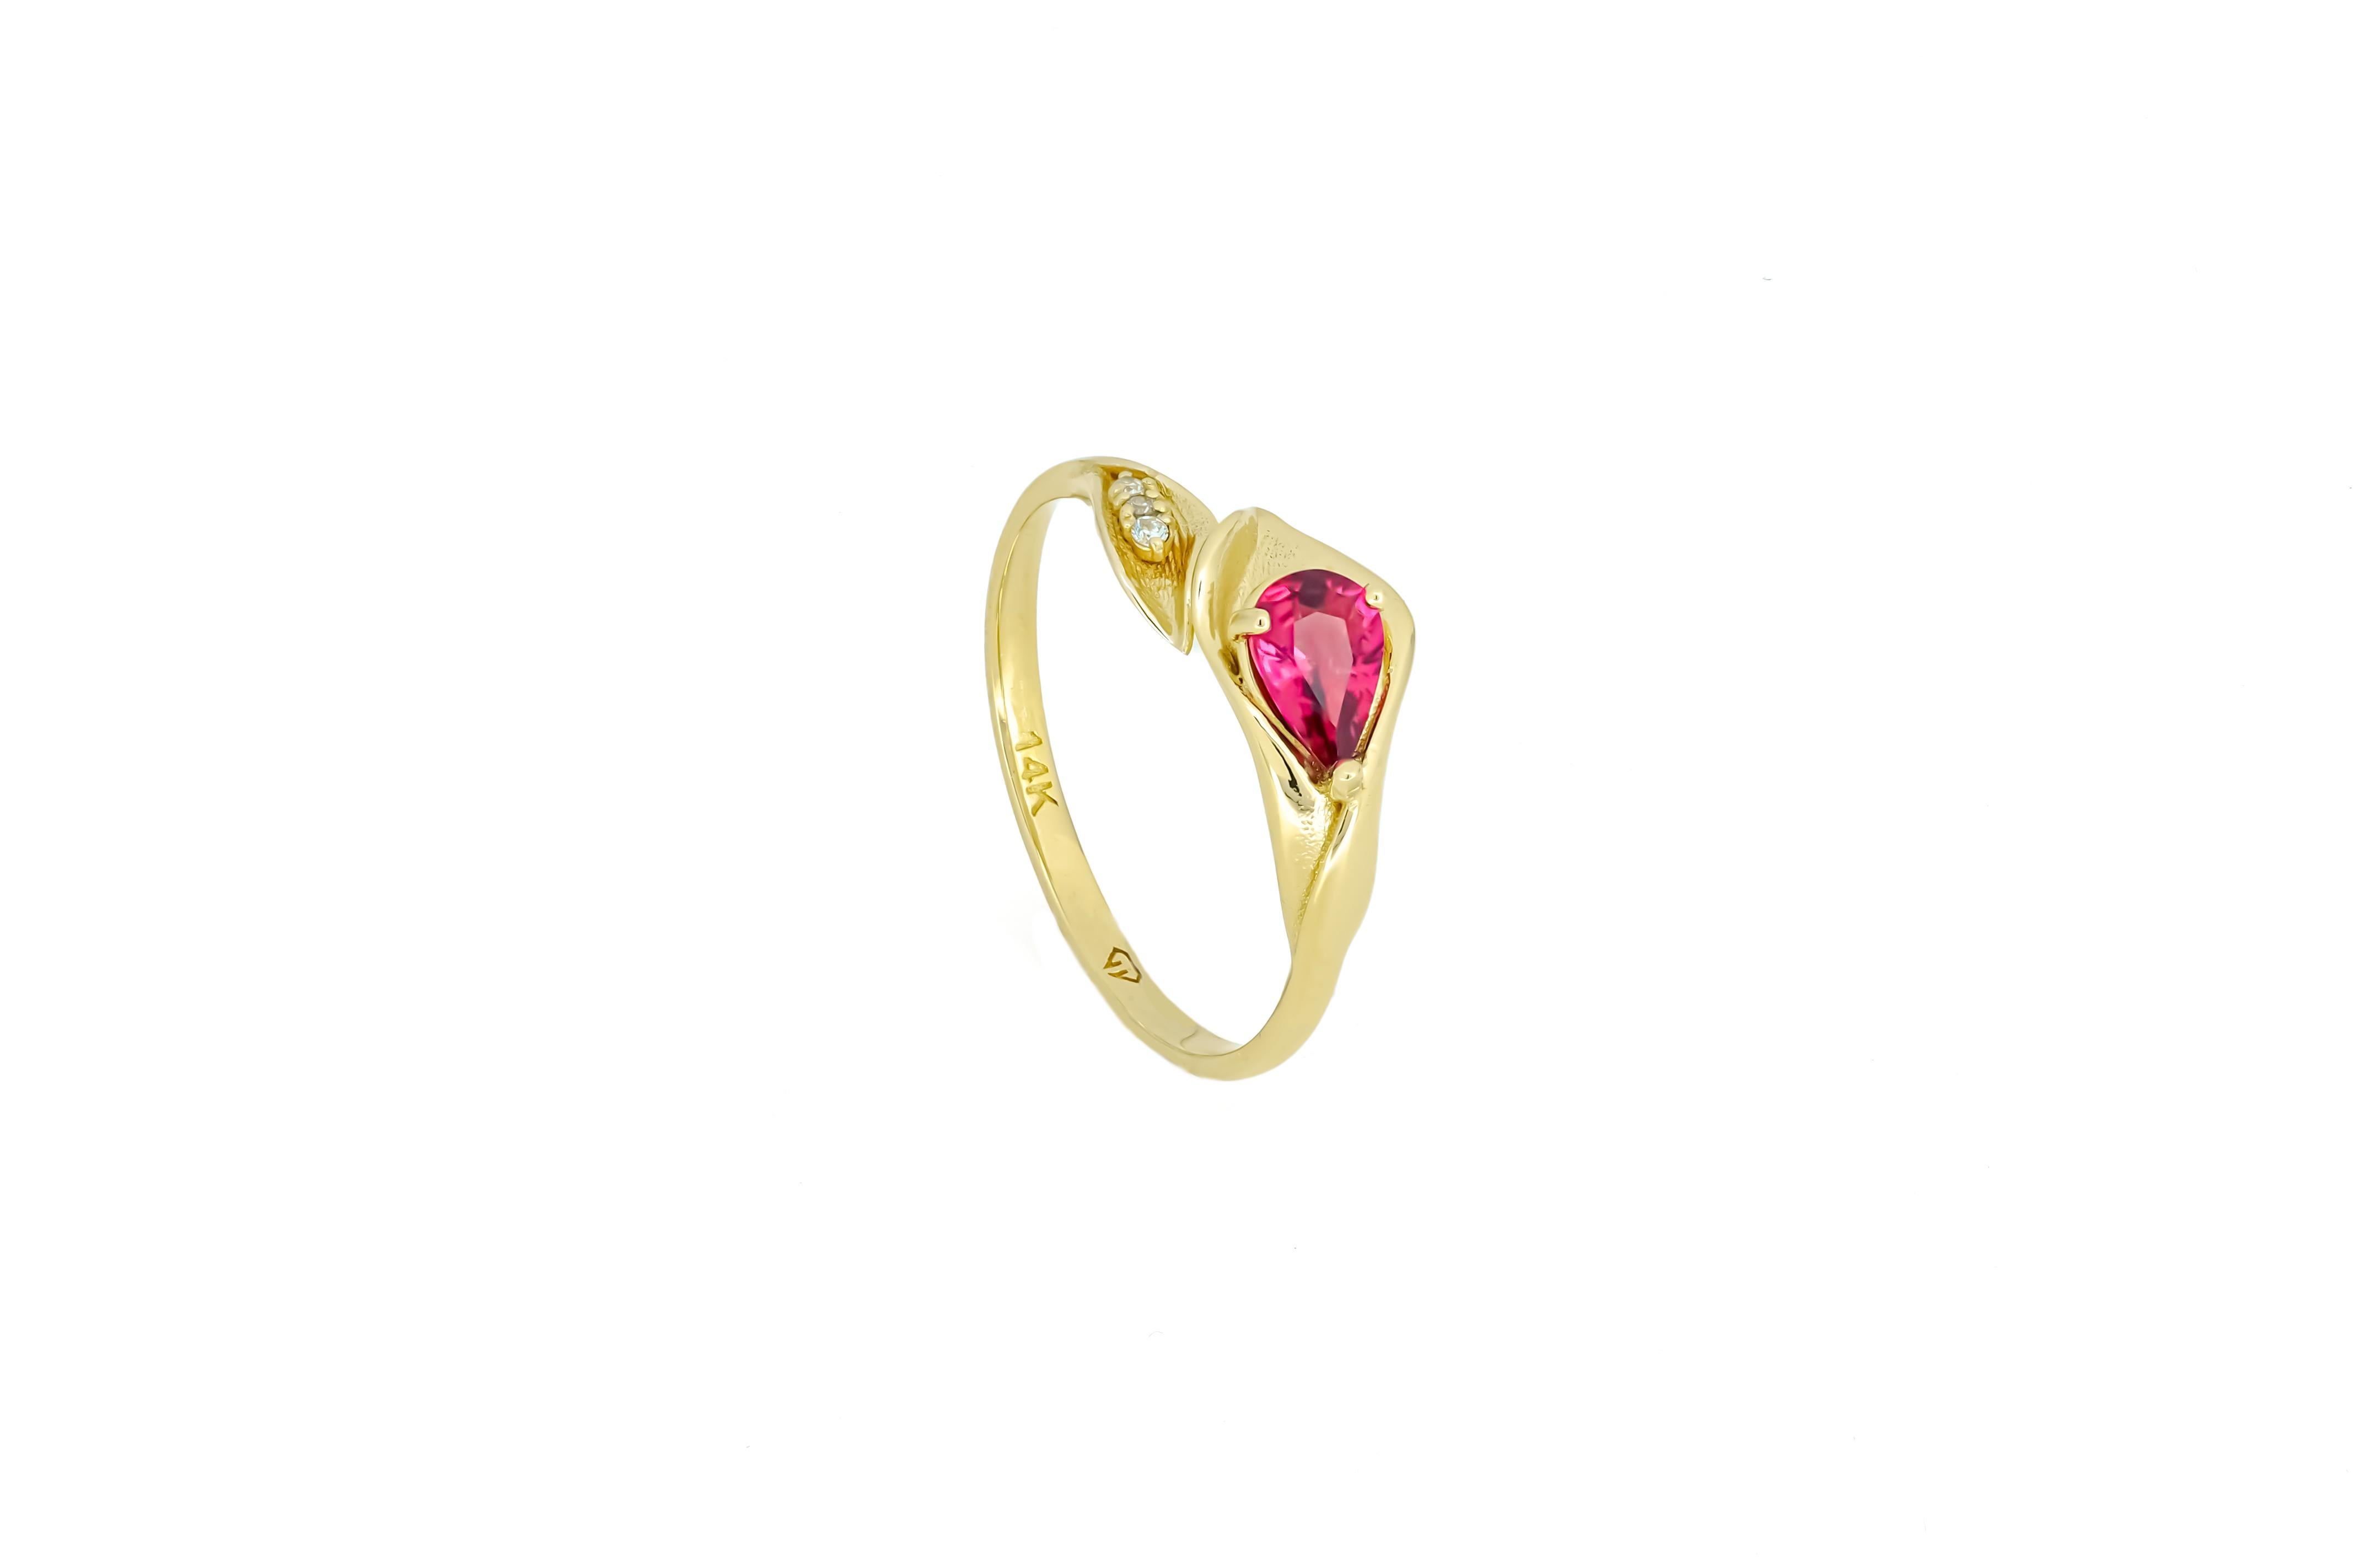 Lily Calla Gold Ring, 14 Karat Gold Ring with Garnet and Diamonds For Sale 5